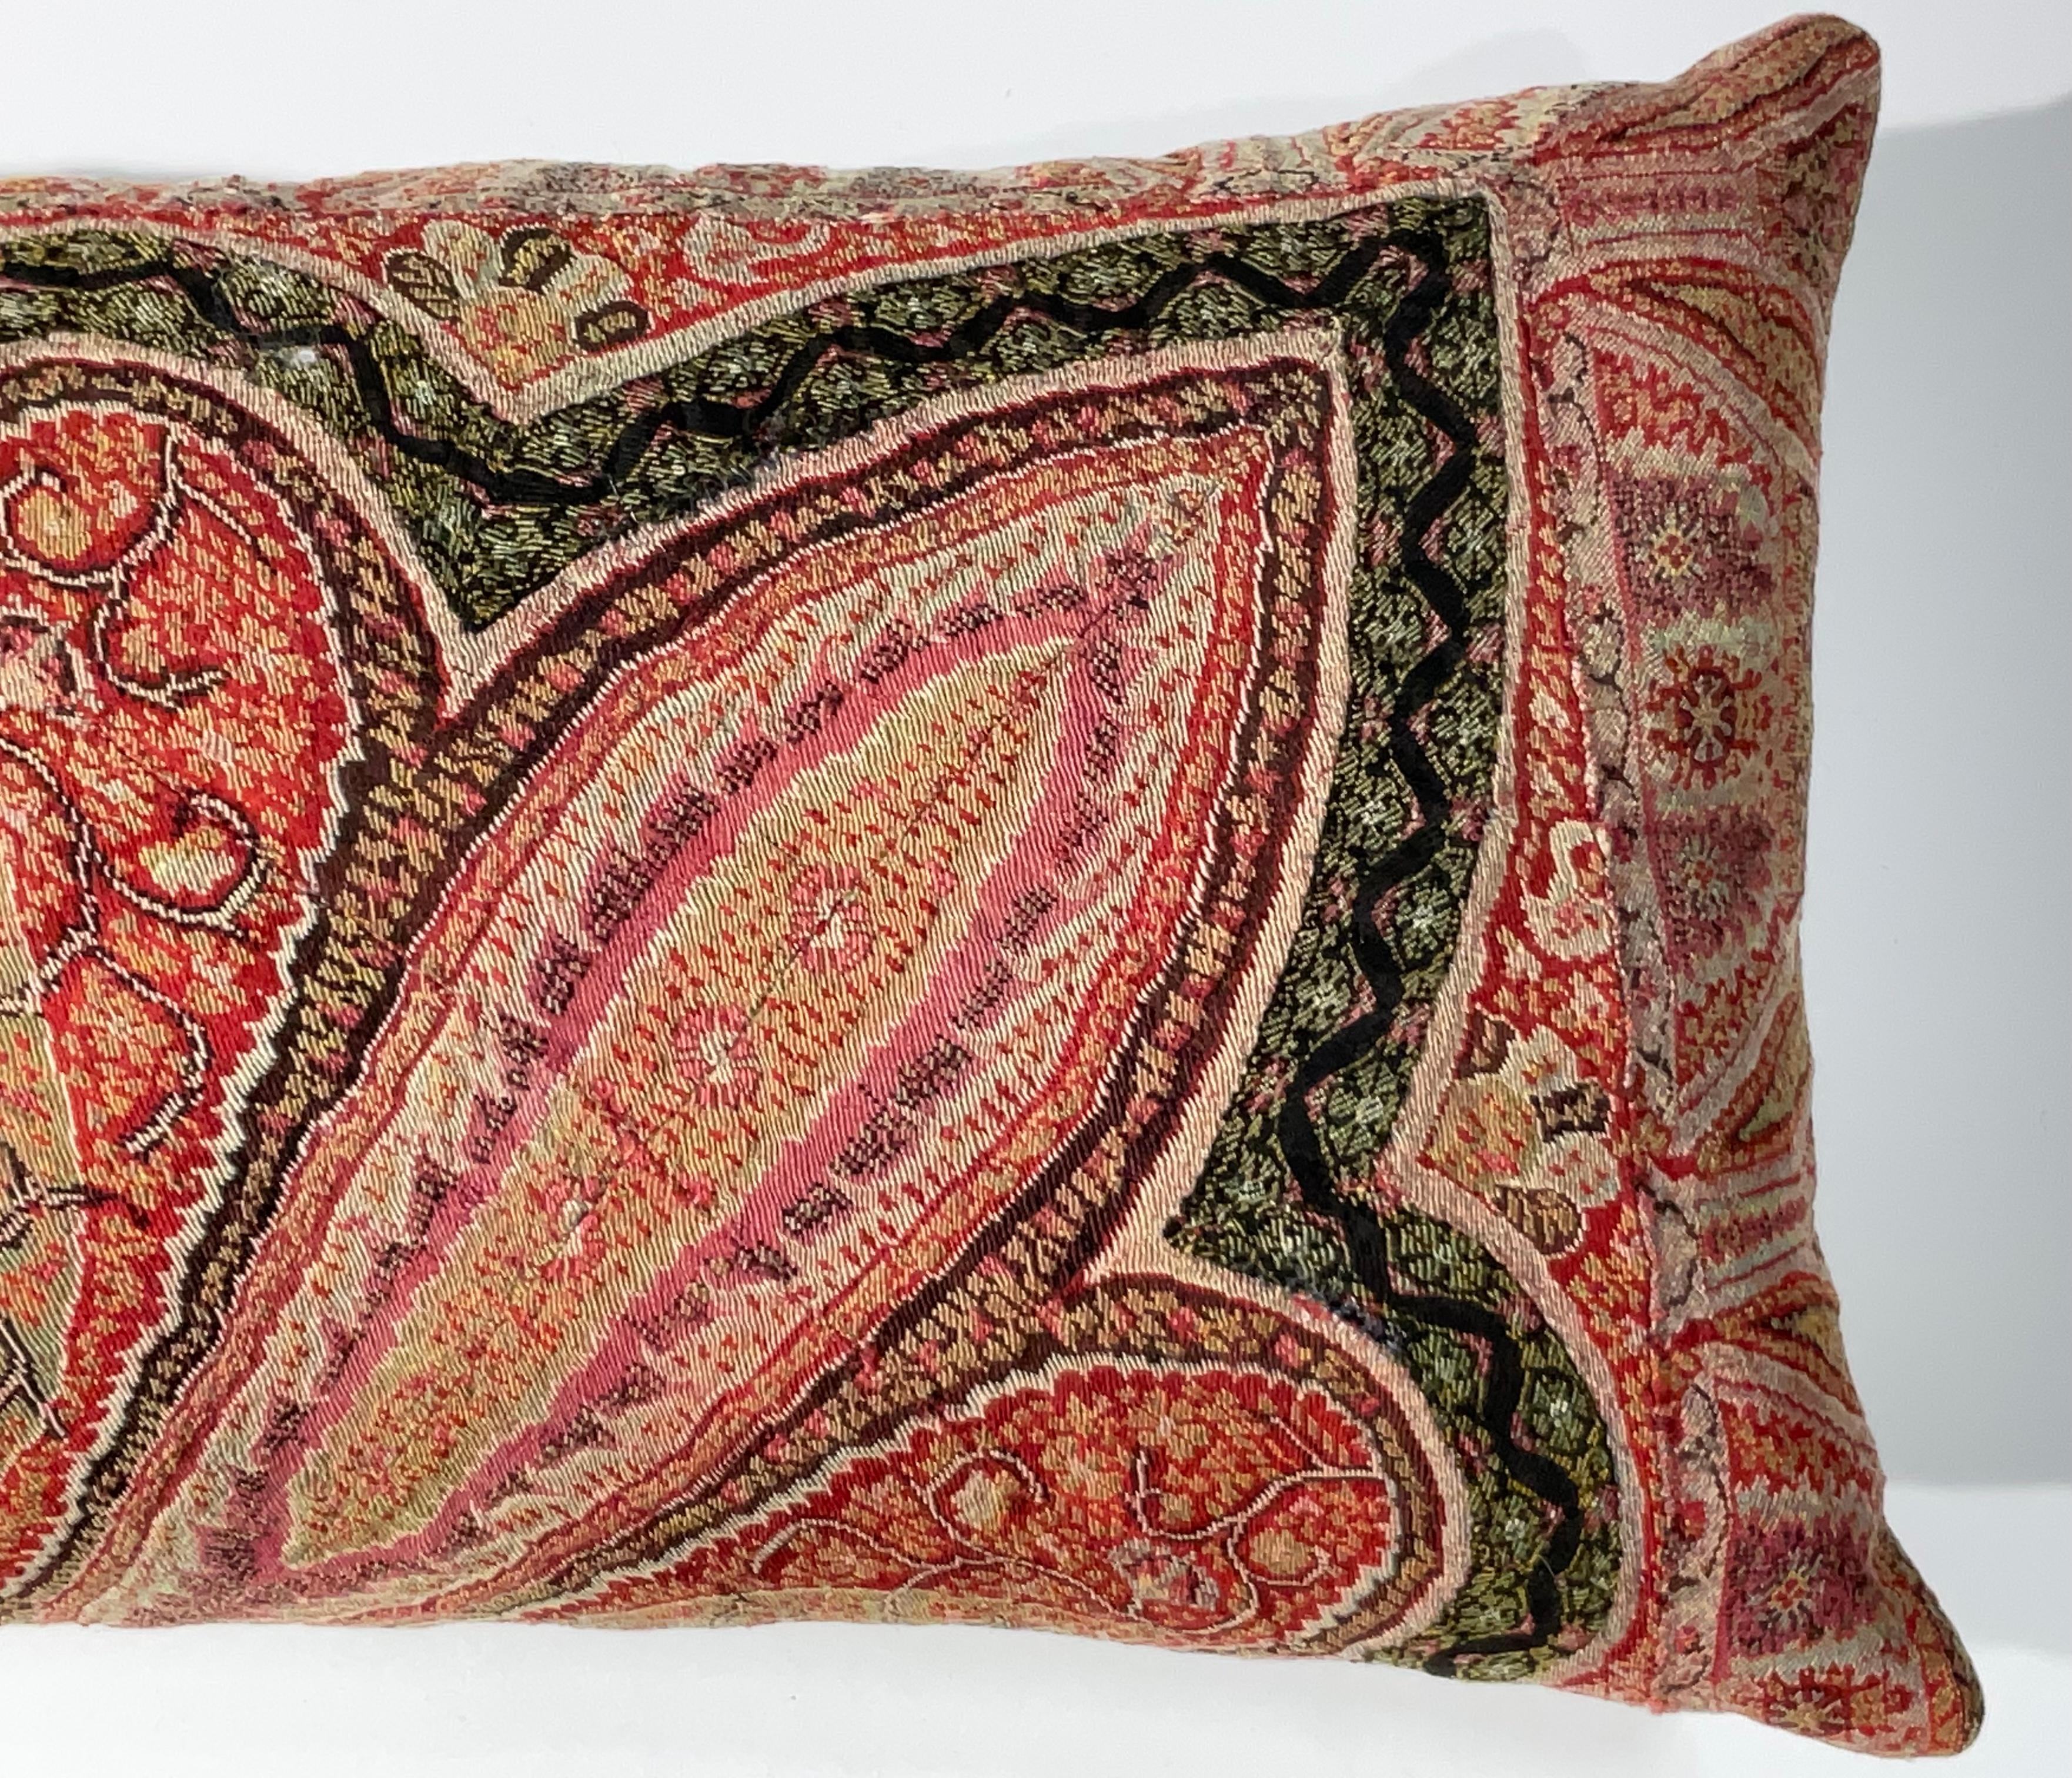 Single Antique Pillow Made from Kashmir Shawl For Sale 1